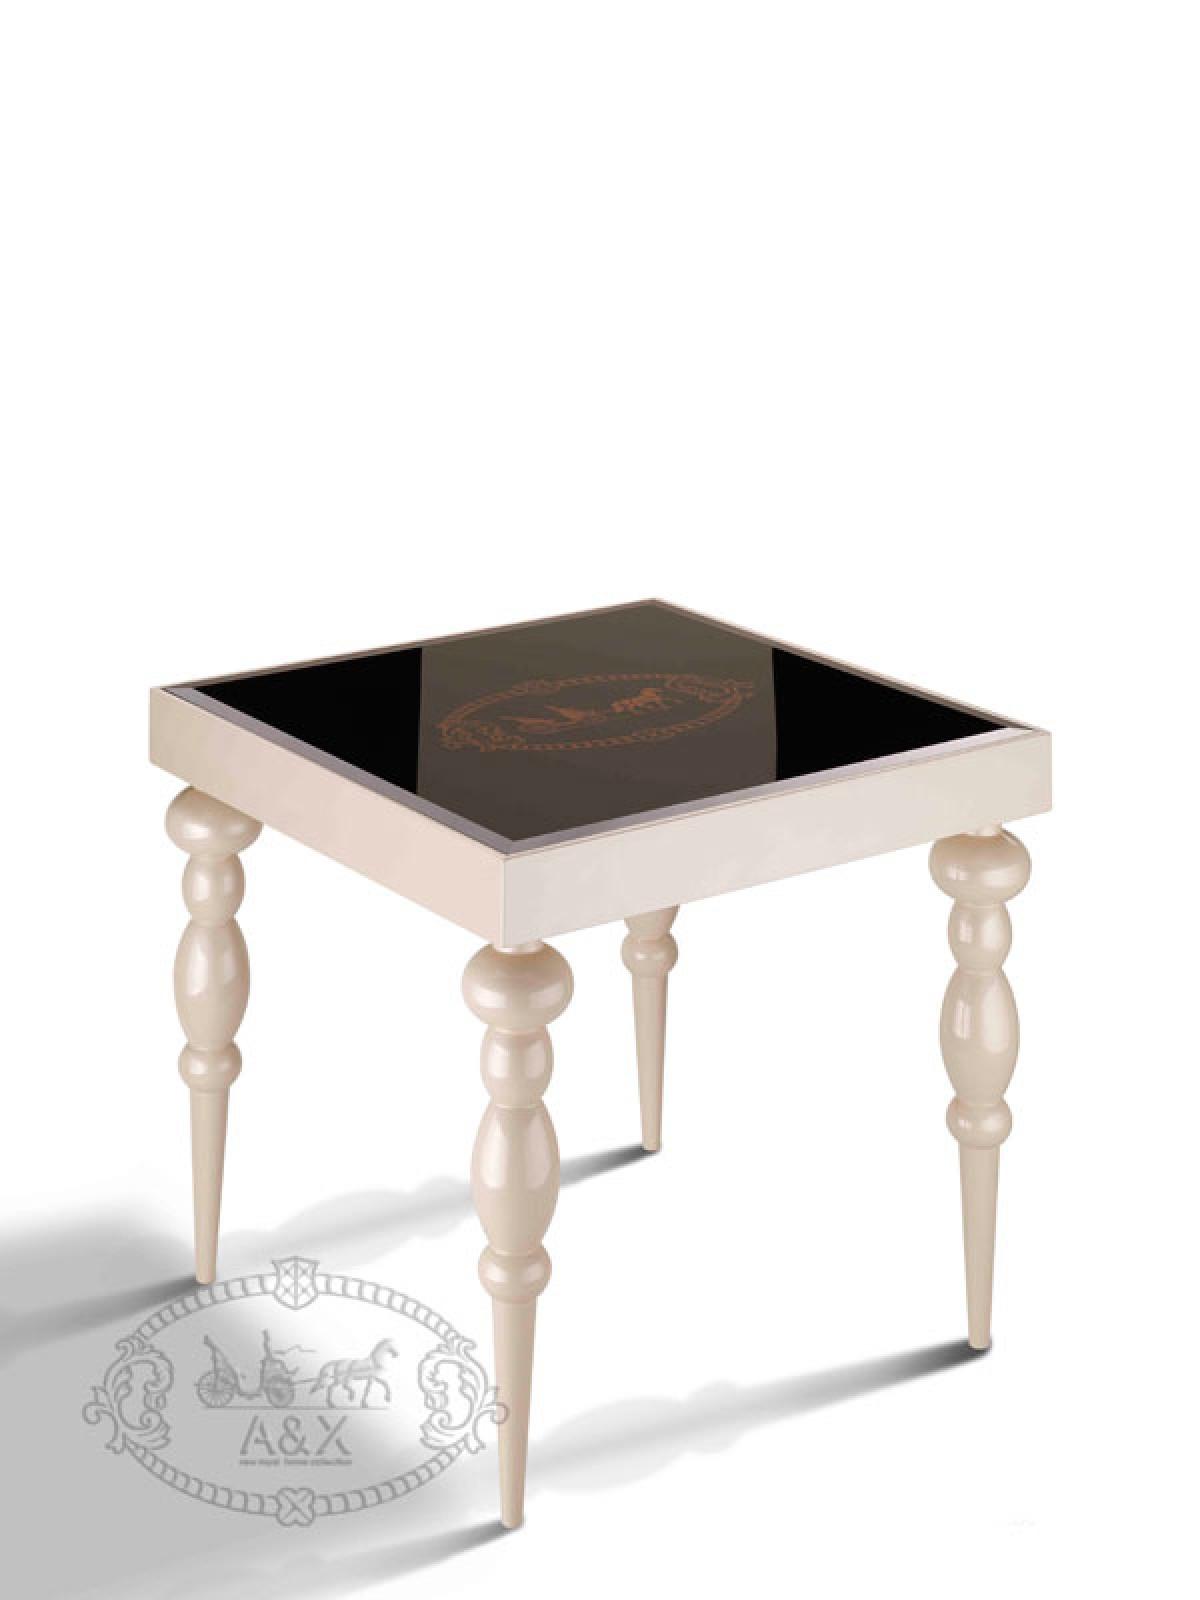 

    
Luxury Glossy Champagne w/Glass Top End Table VIG A&X Saure Transitional
